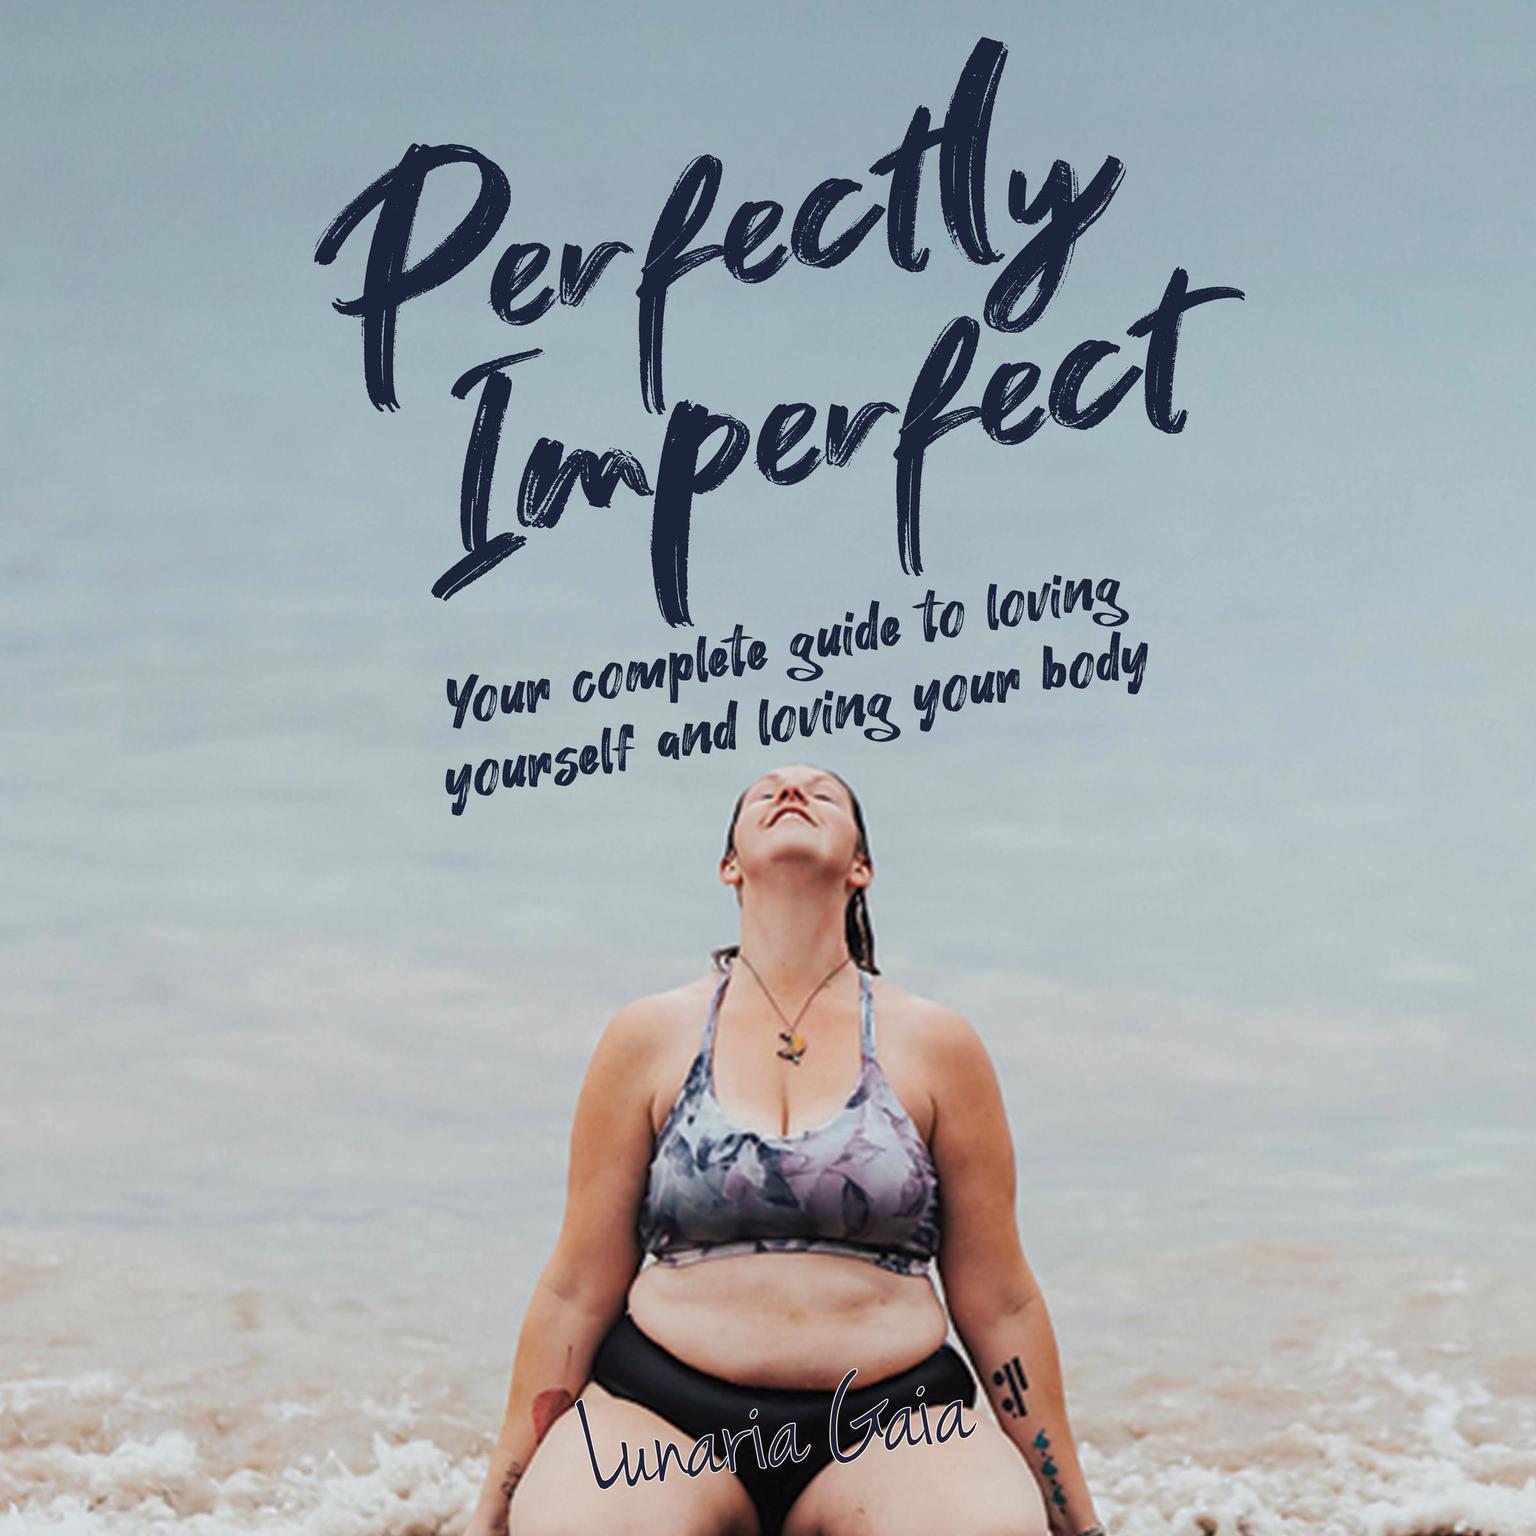 Perfectly Imperfect: Your complete guide to loving yourself and loving your body Audiobook, by Lunaria Gaia